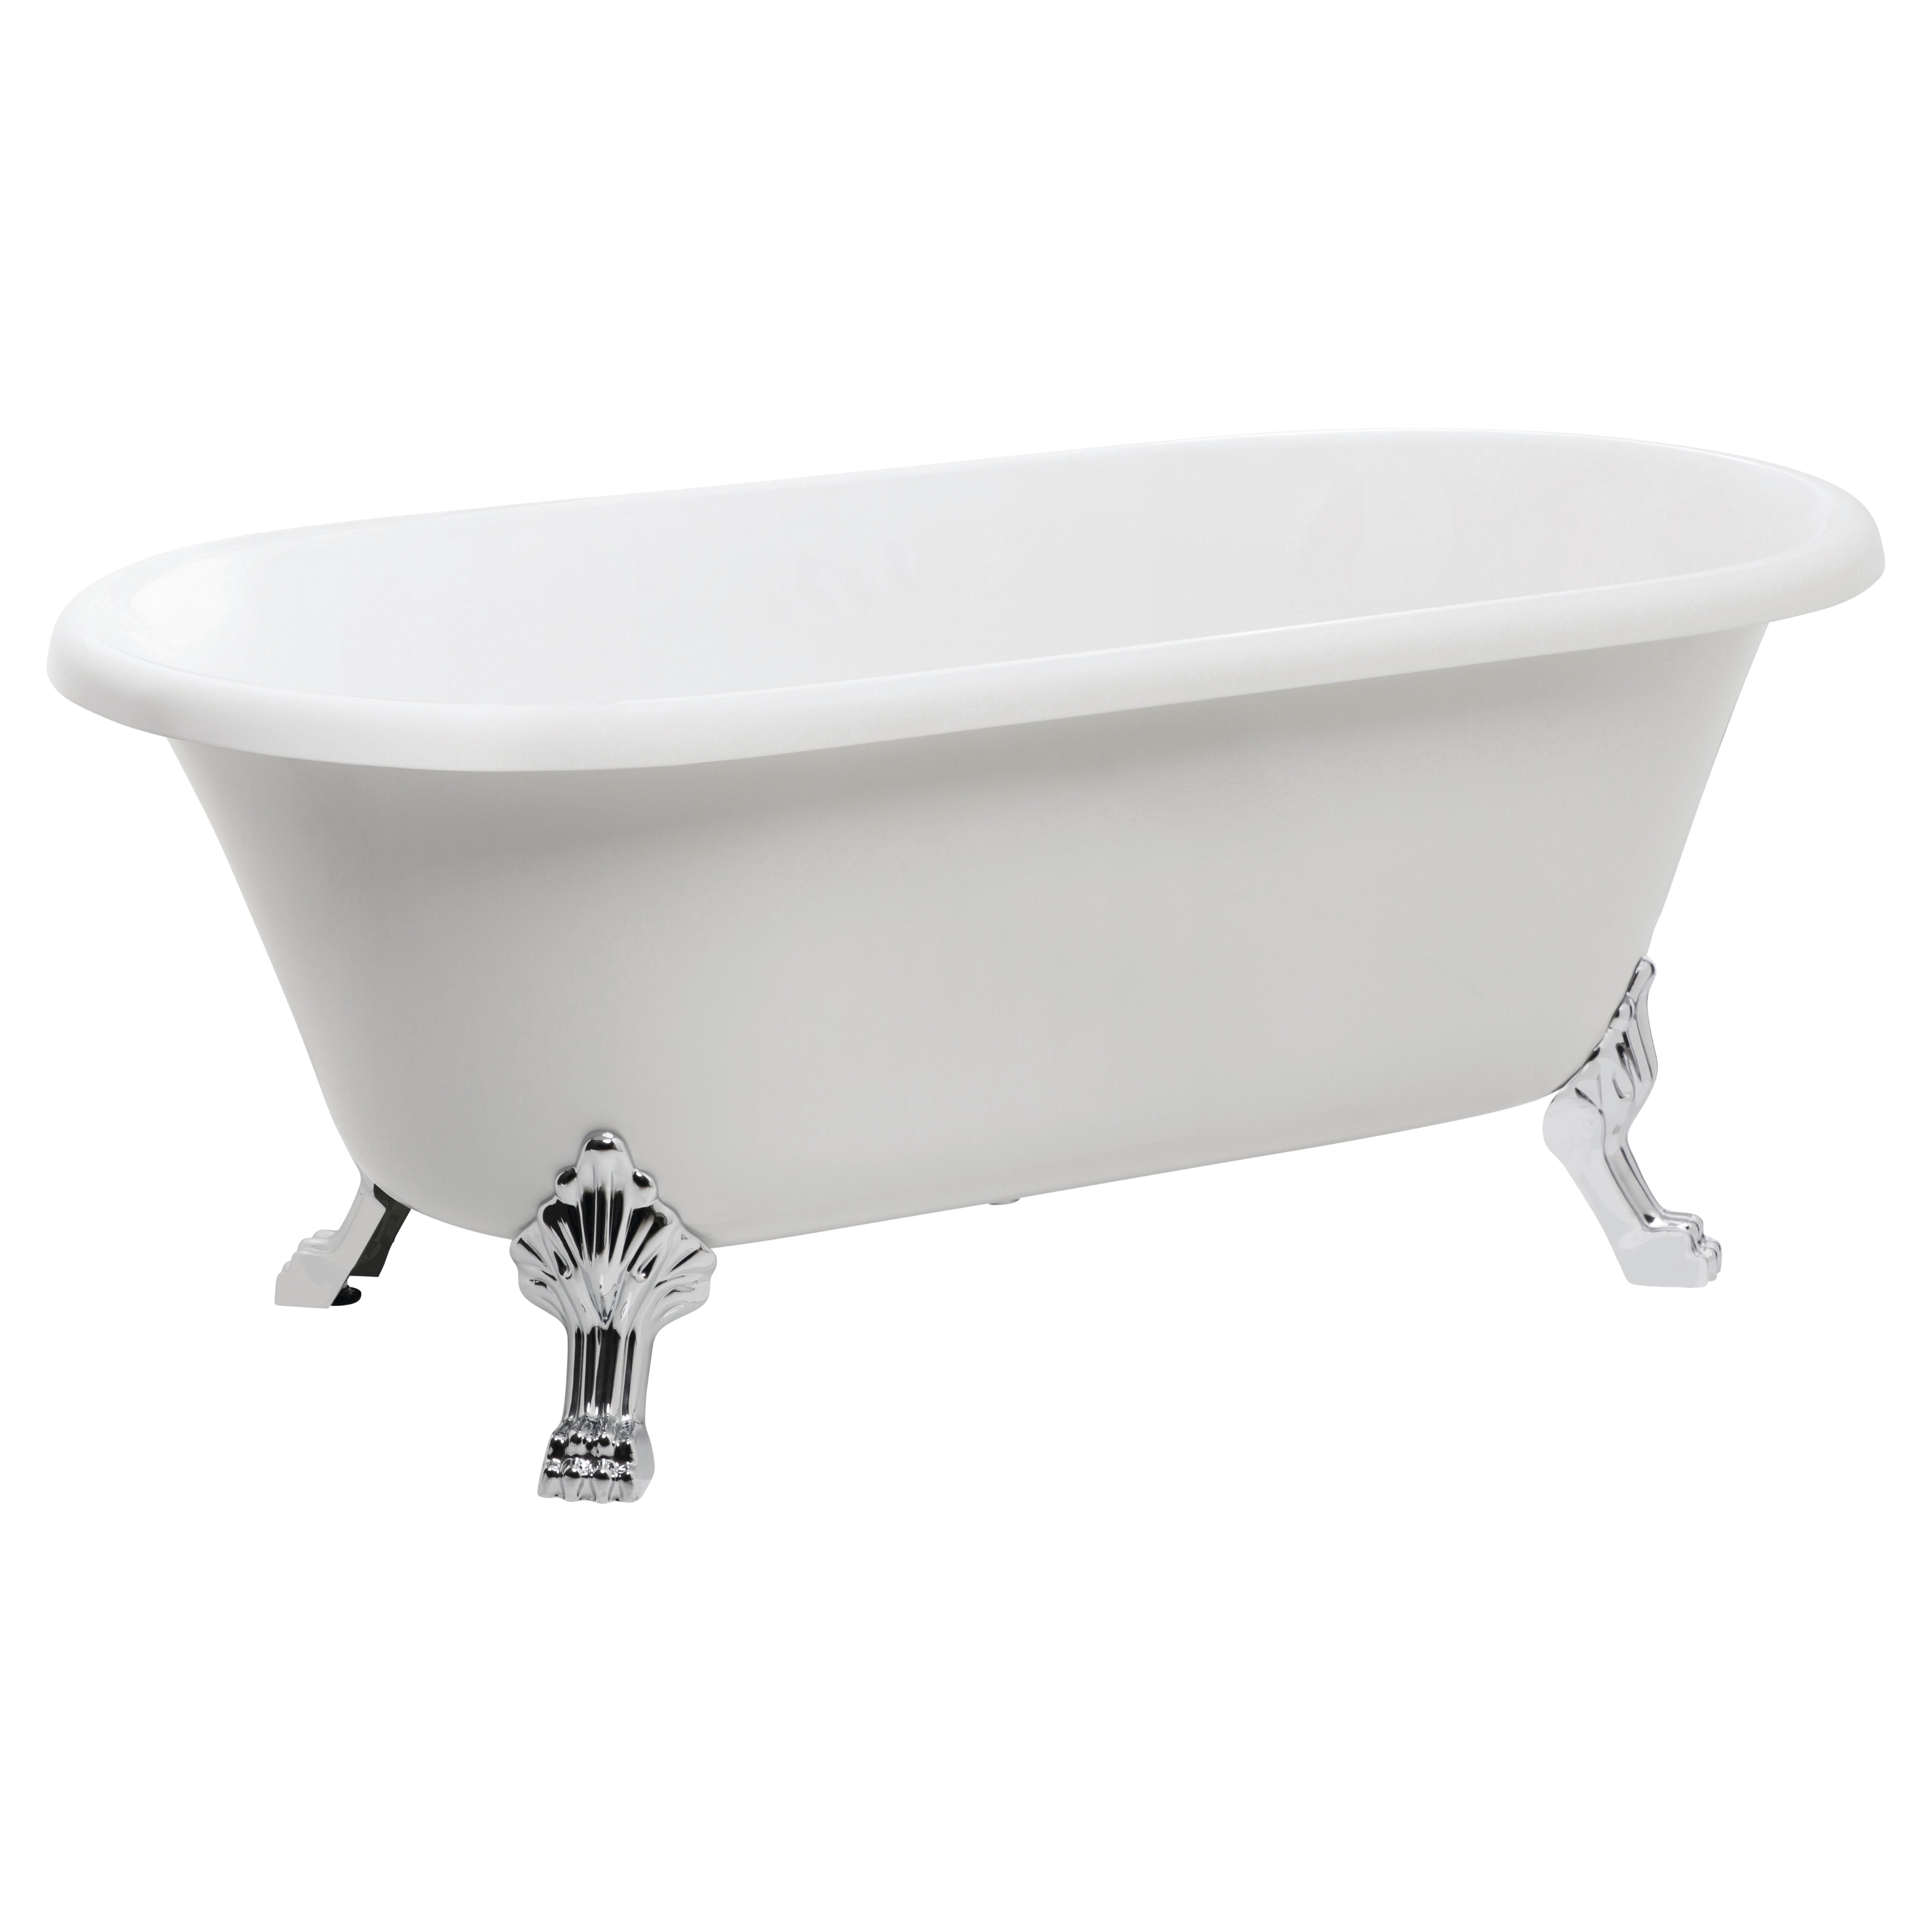 JOHNSON SUISSE COLONIAL FREESTANDING BATH ACRYLIC WHITE 1500MM